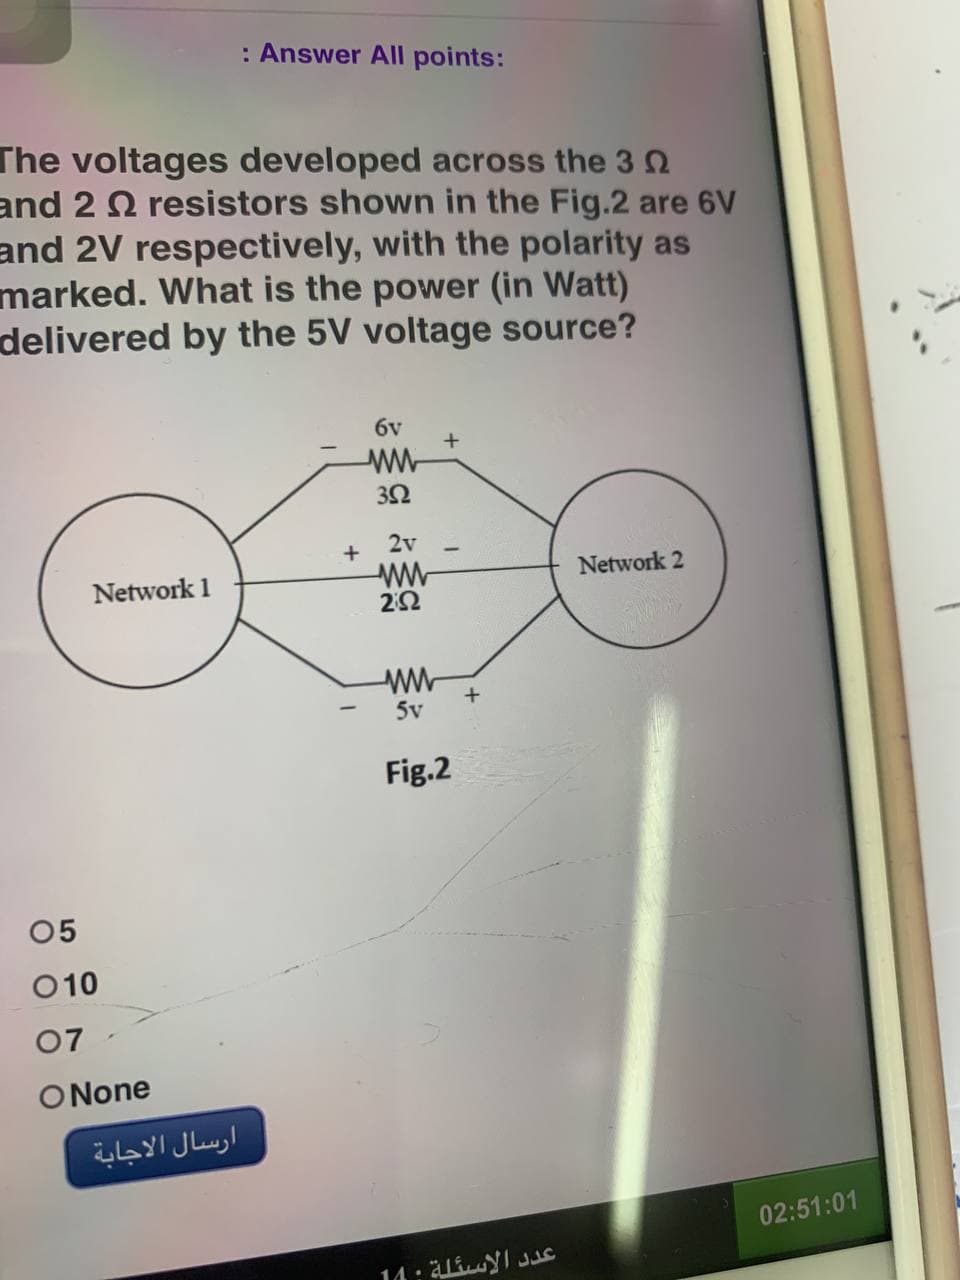 : Answer All points:
The voltages developed across the 3
and 2 resistors shown in the Fig.2 are 6V
and 2V respectively, with the polarity as
marked. What is the power (in Watt)
delivered by the 5V voltage source?
бу
ww
+
352
Network 2
Network 1
05
010
07
ONone
ارسال الاجابة
+
2v
ww
2:52
ww
5v
Fig.2
عدد الاسئلة : 10
02:51:01